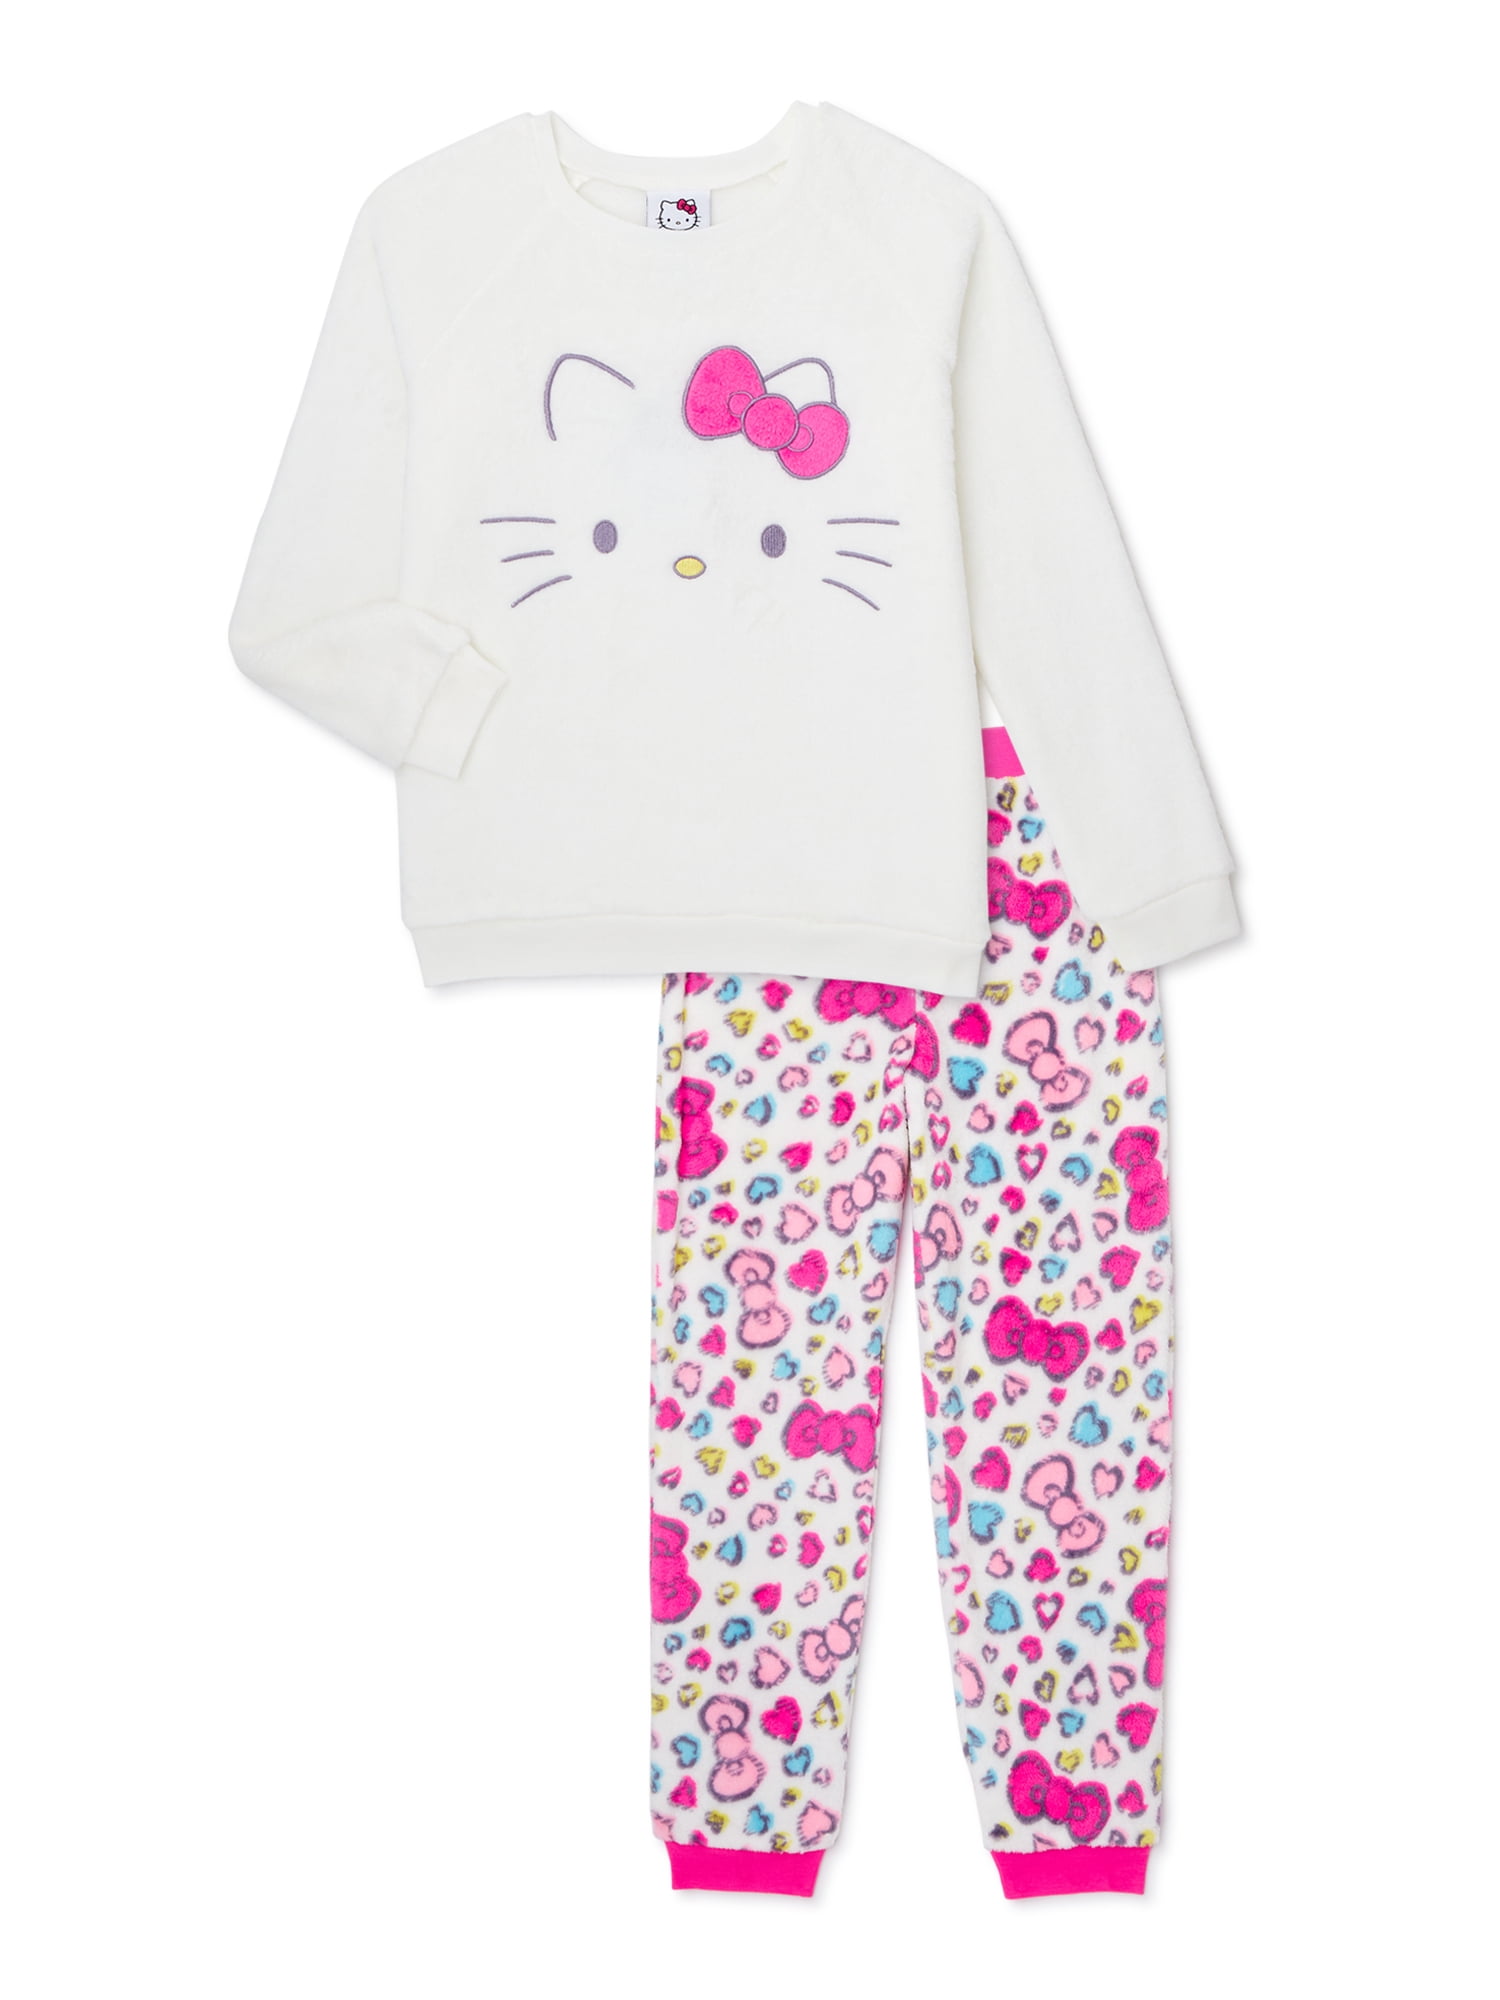 Hello Kitty Girls Pink Bow Long Sleeve Top and Pants Pajama Set, 2-Piece,  Sizes 4-12 